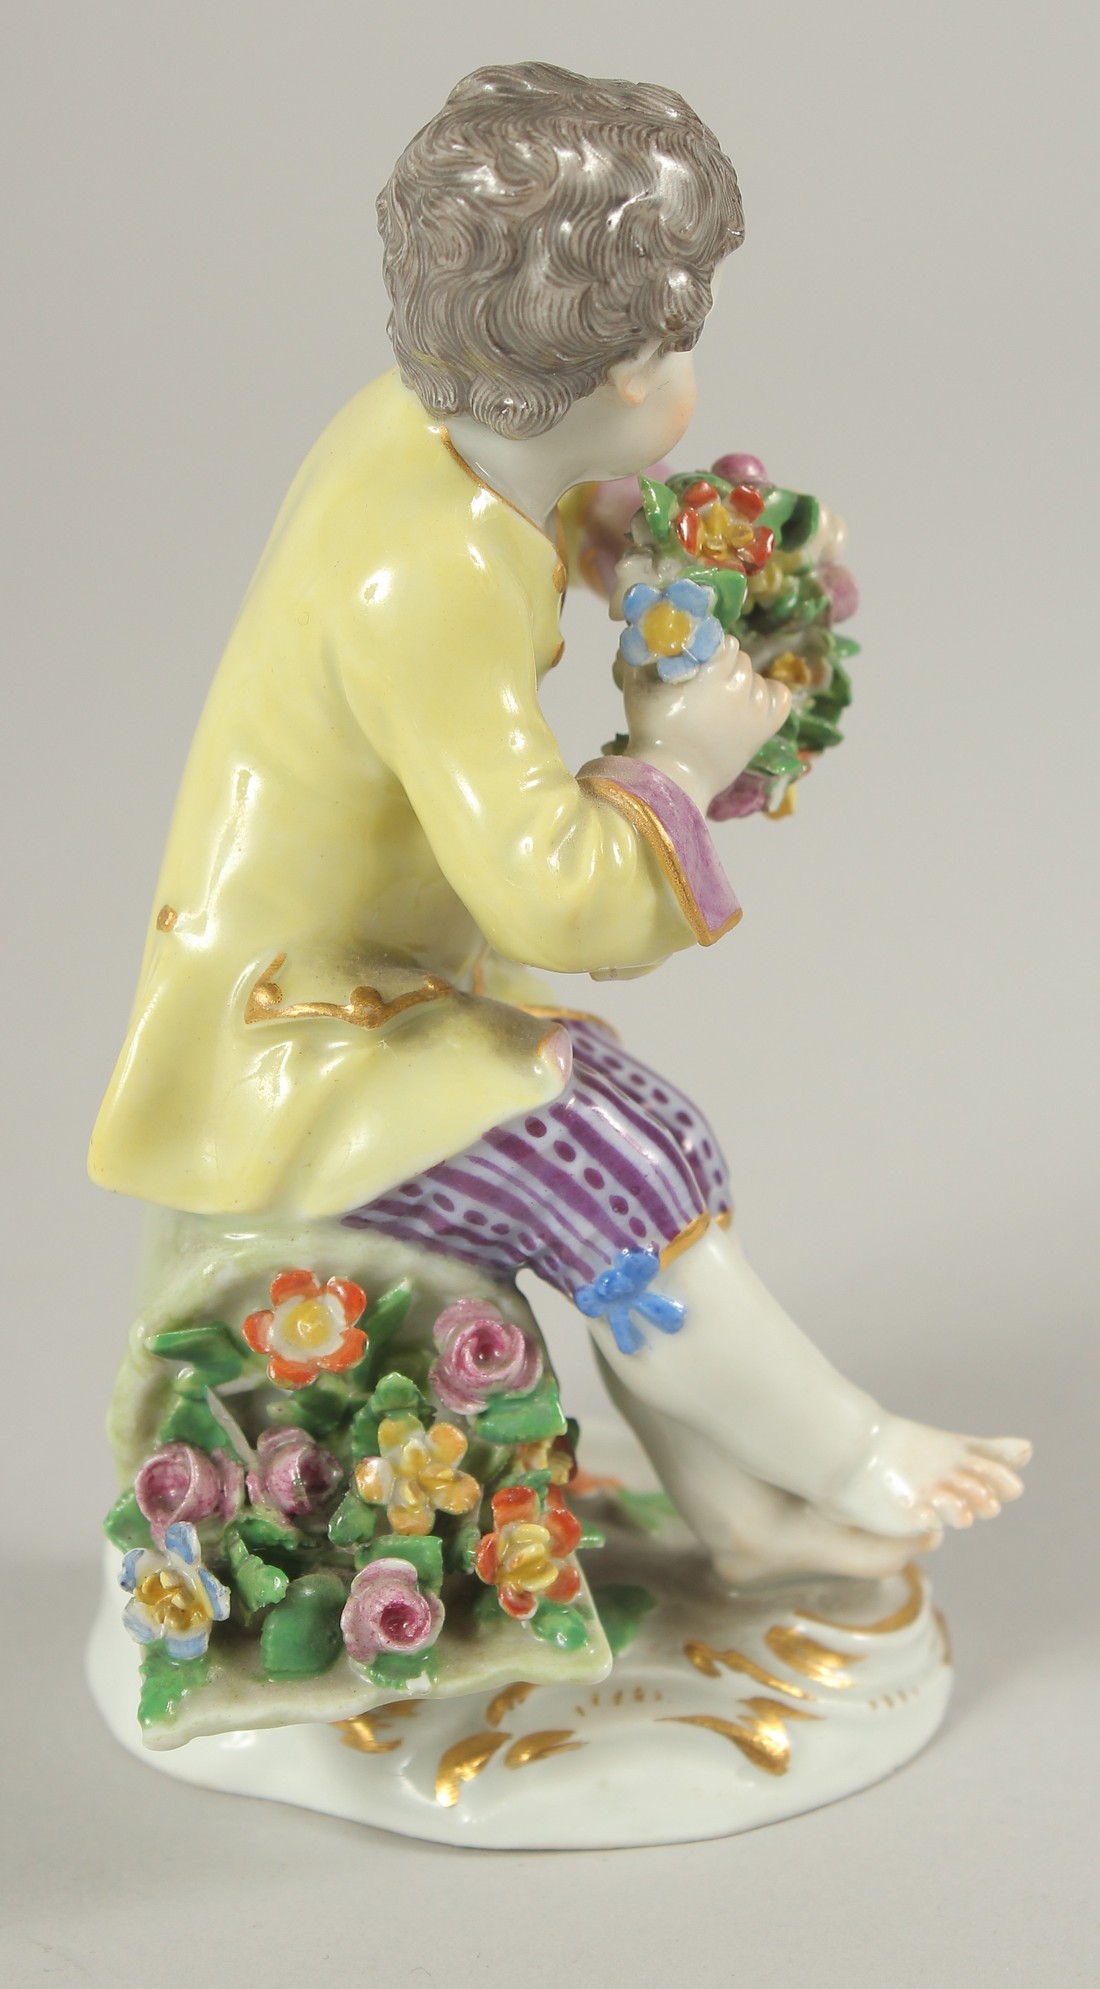 A MEISSEN PORCELAIN FIGURE OF A BOY in a yellow coat and carrying a garland of flowers. 4.5ins high. - Image 2 of 4